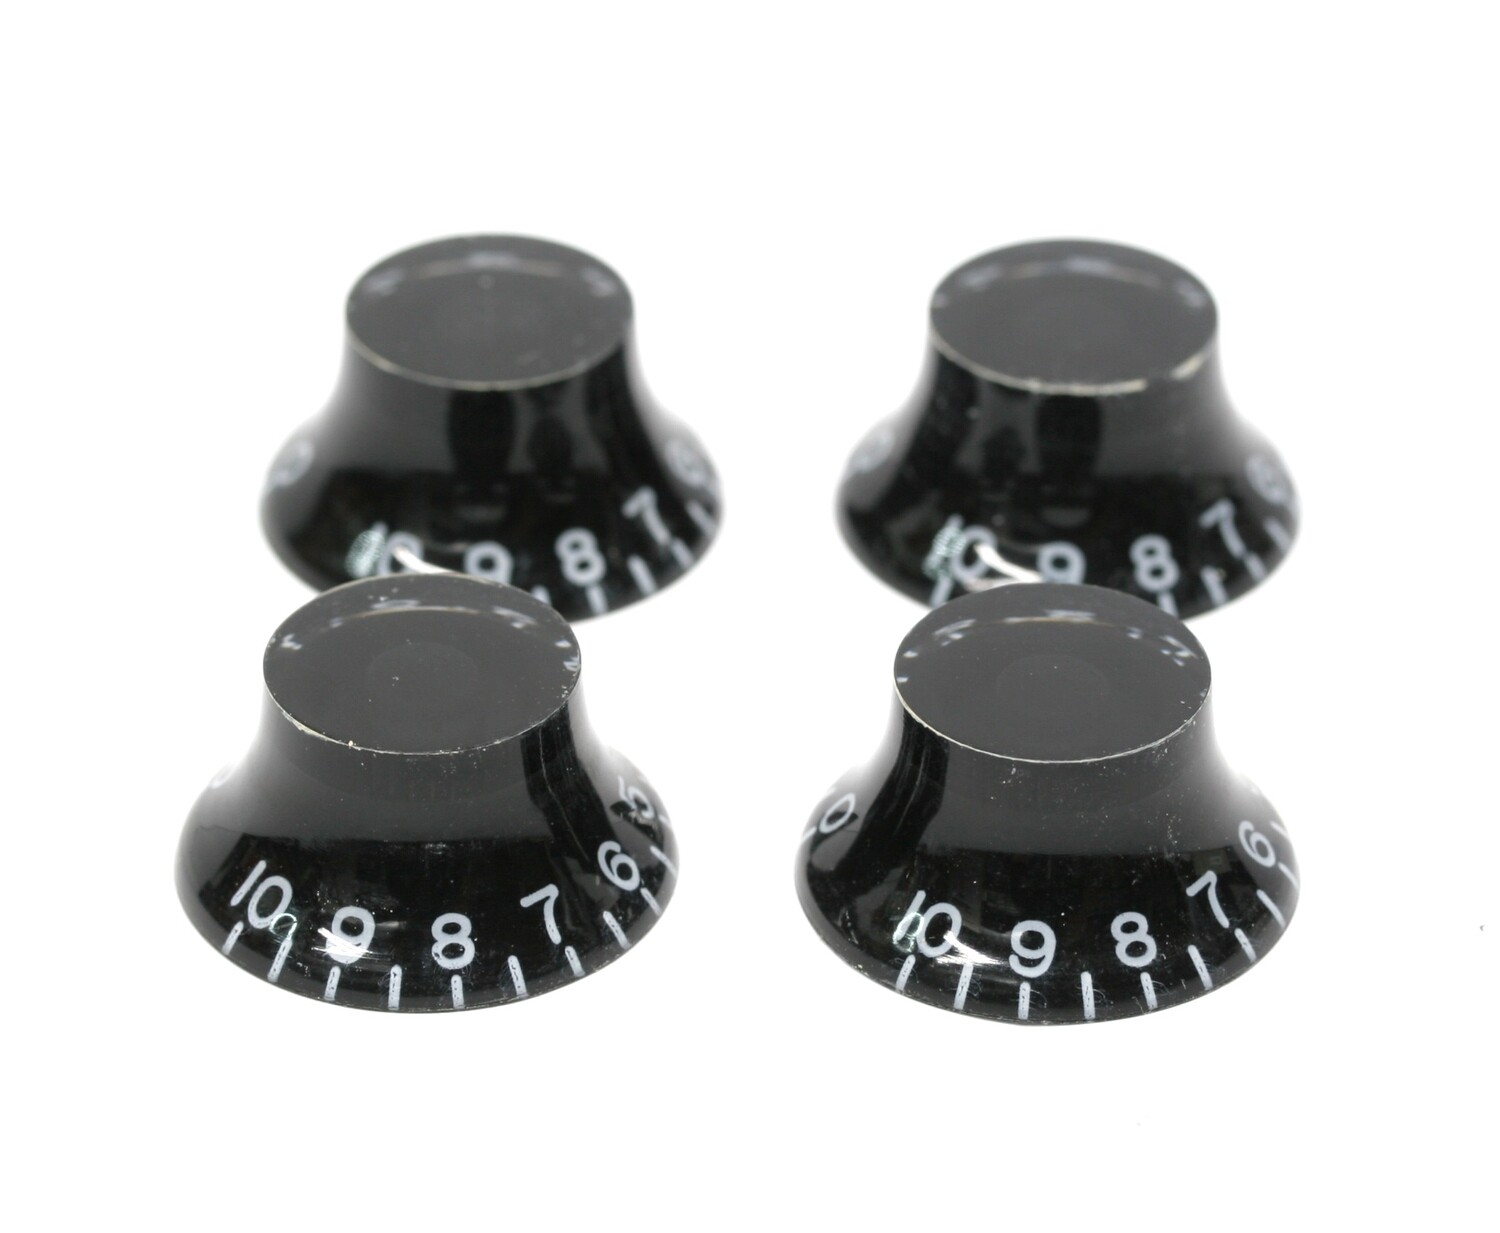 Brio Left Hand Bell Knobs Imperial ( US ) Size Set of 4 Black